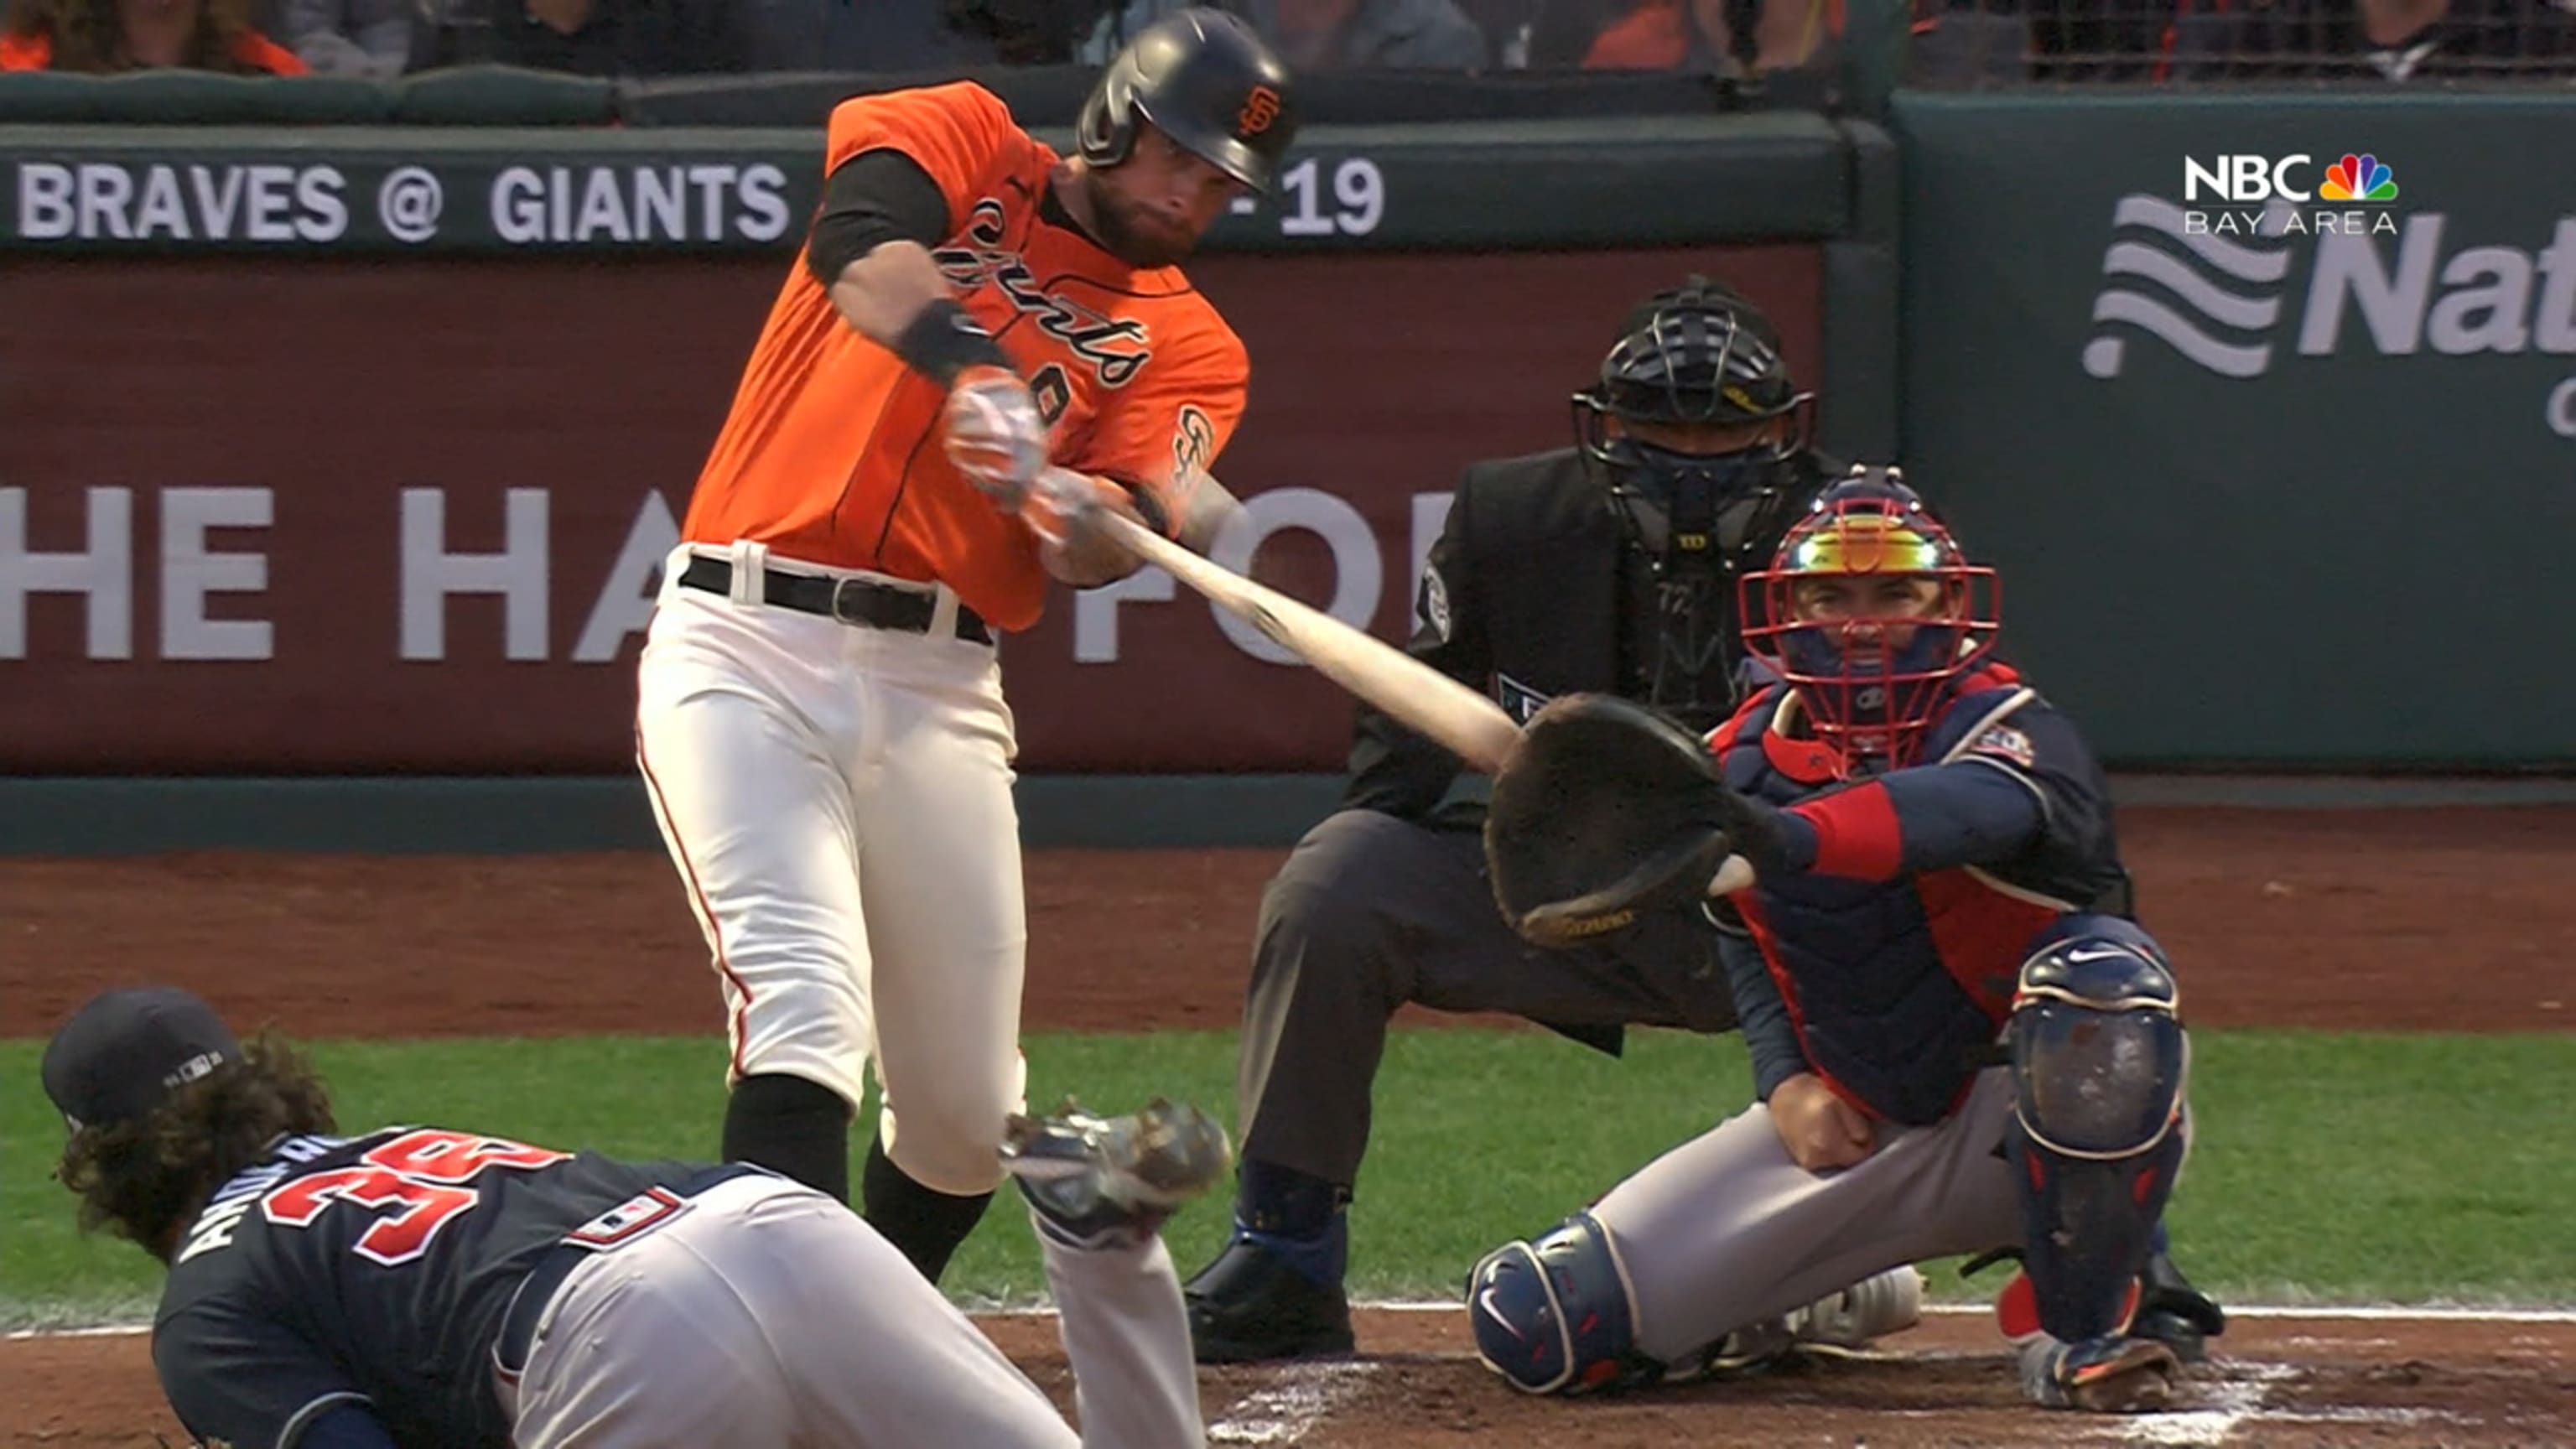 Stymied all night, SF Giants walked off by Braves in series opener